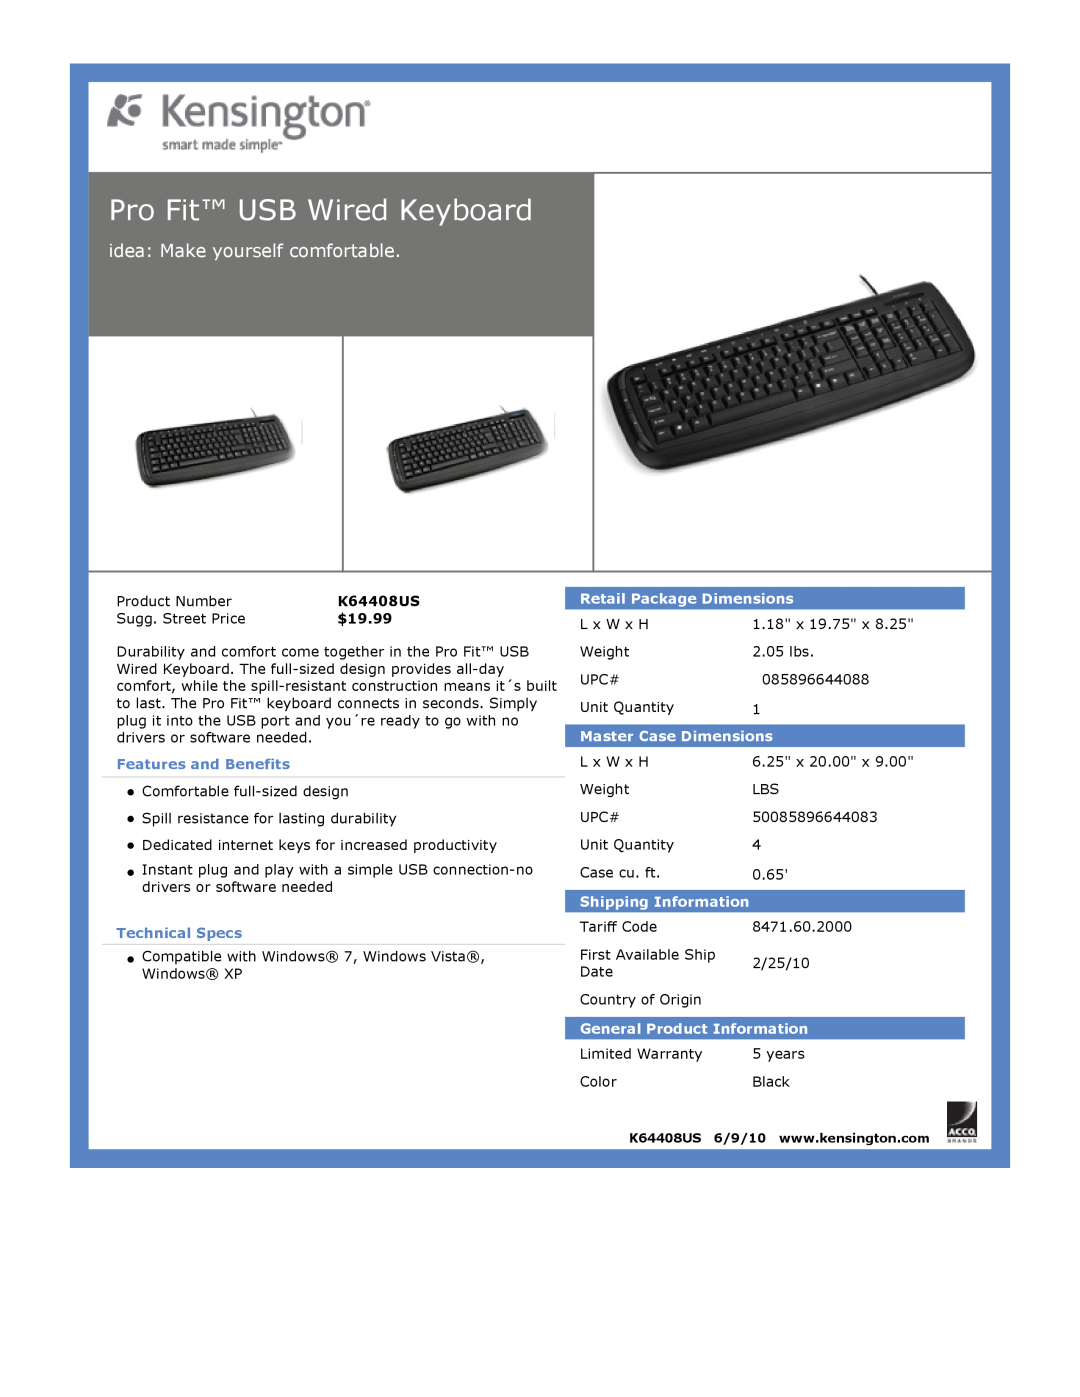 Kensington EU64325 dimensions Pro Fit USB Wired Keyboard, idea: Make yourself comfortable, $19.99, Features and Benefits 